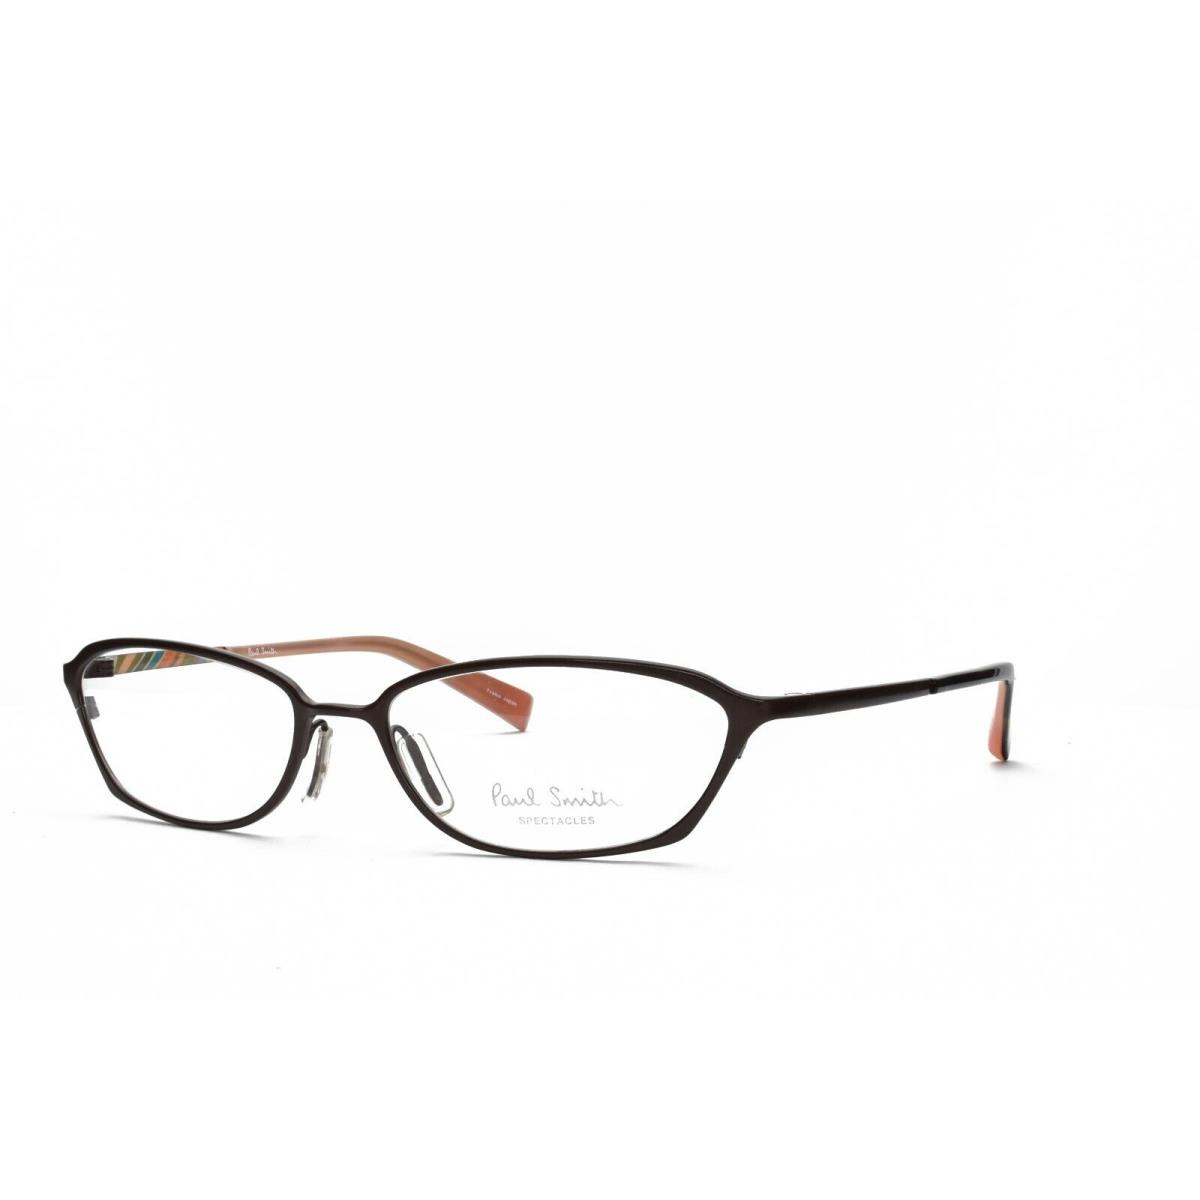 Paul Smith PS 192 Cho Eyeglasses Frames Only 53-16-130